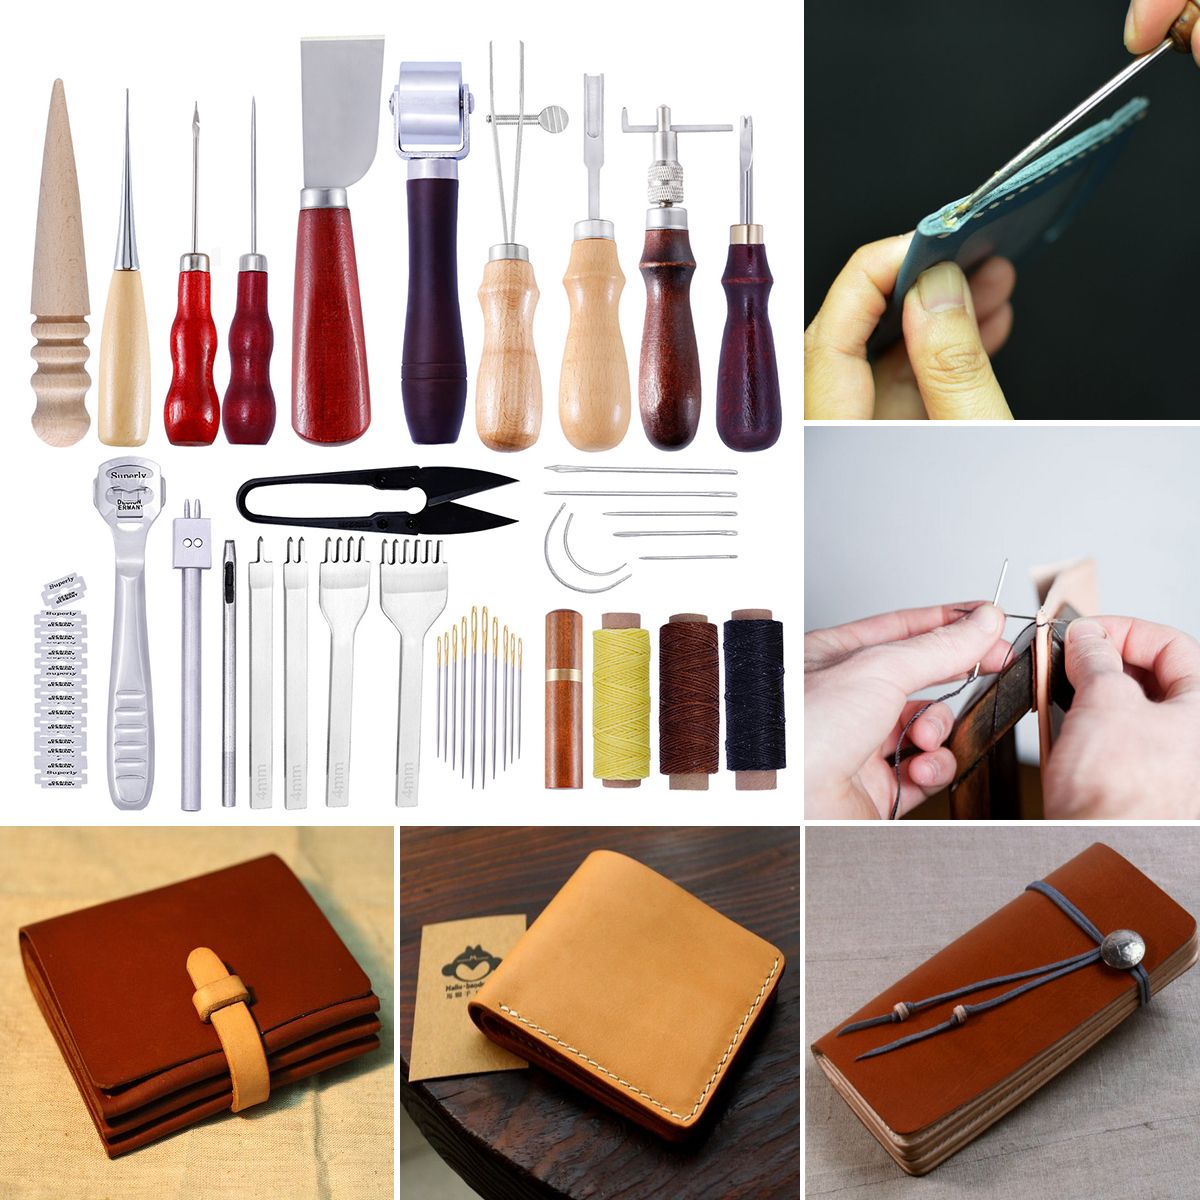 Professional-Handmade-Sewing-Leather-Craft-Tools-Kit-Punch-Stitching-Carving-1631675